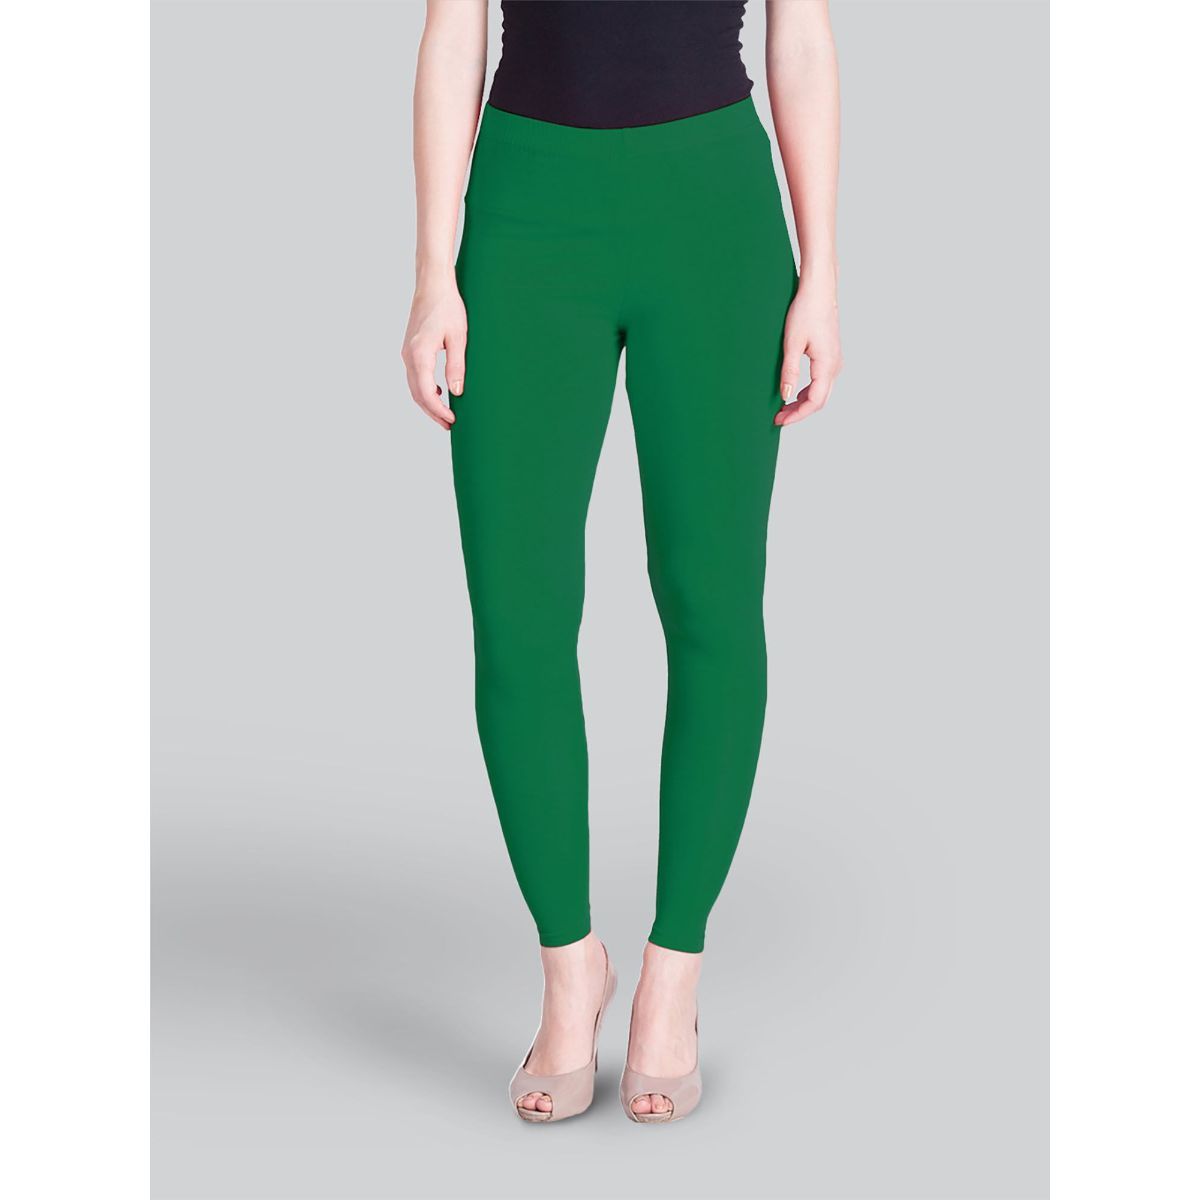 Buy Forest Green Leggings for Women by PERFORMAX Online | Ajio.com